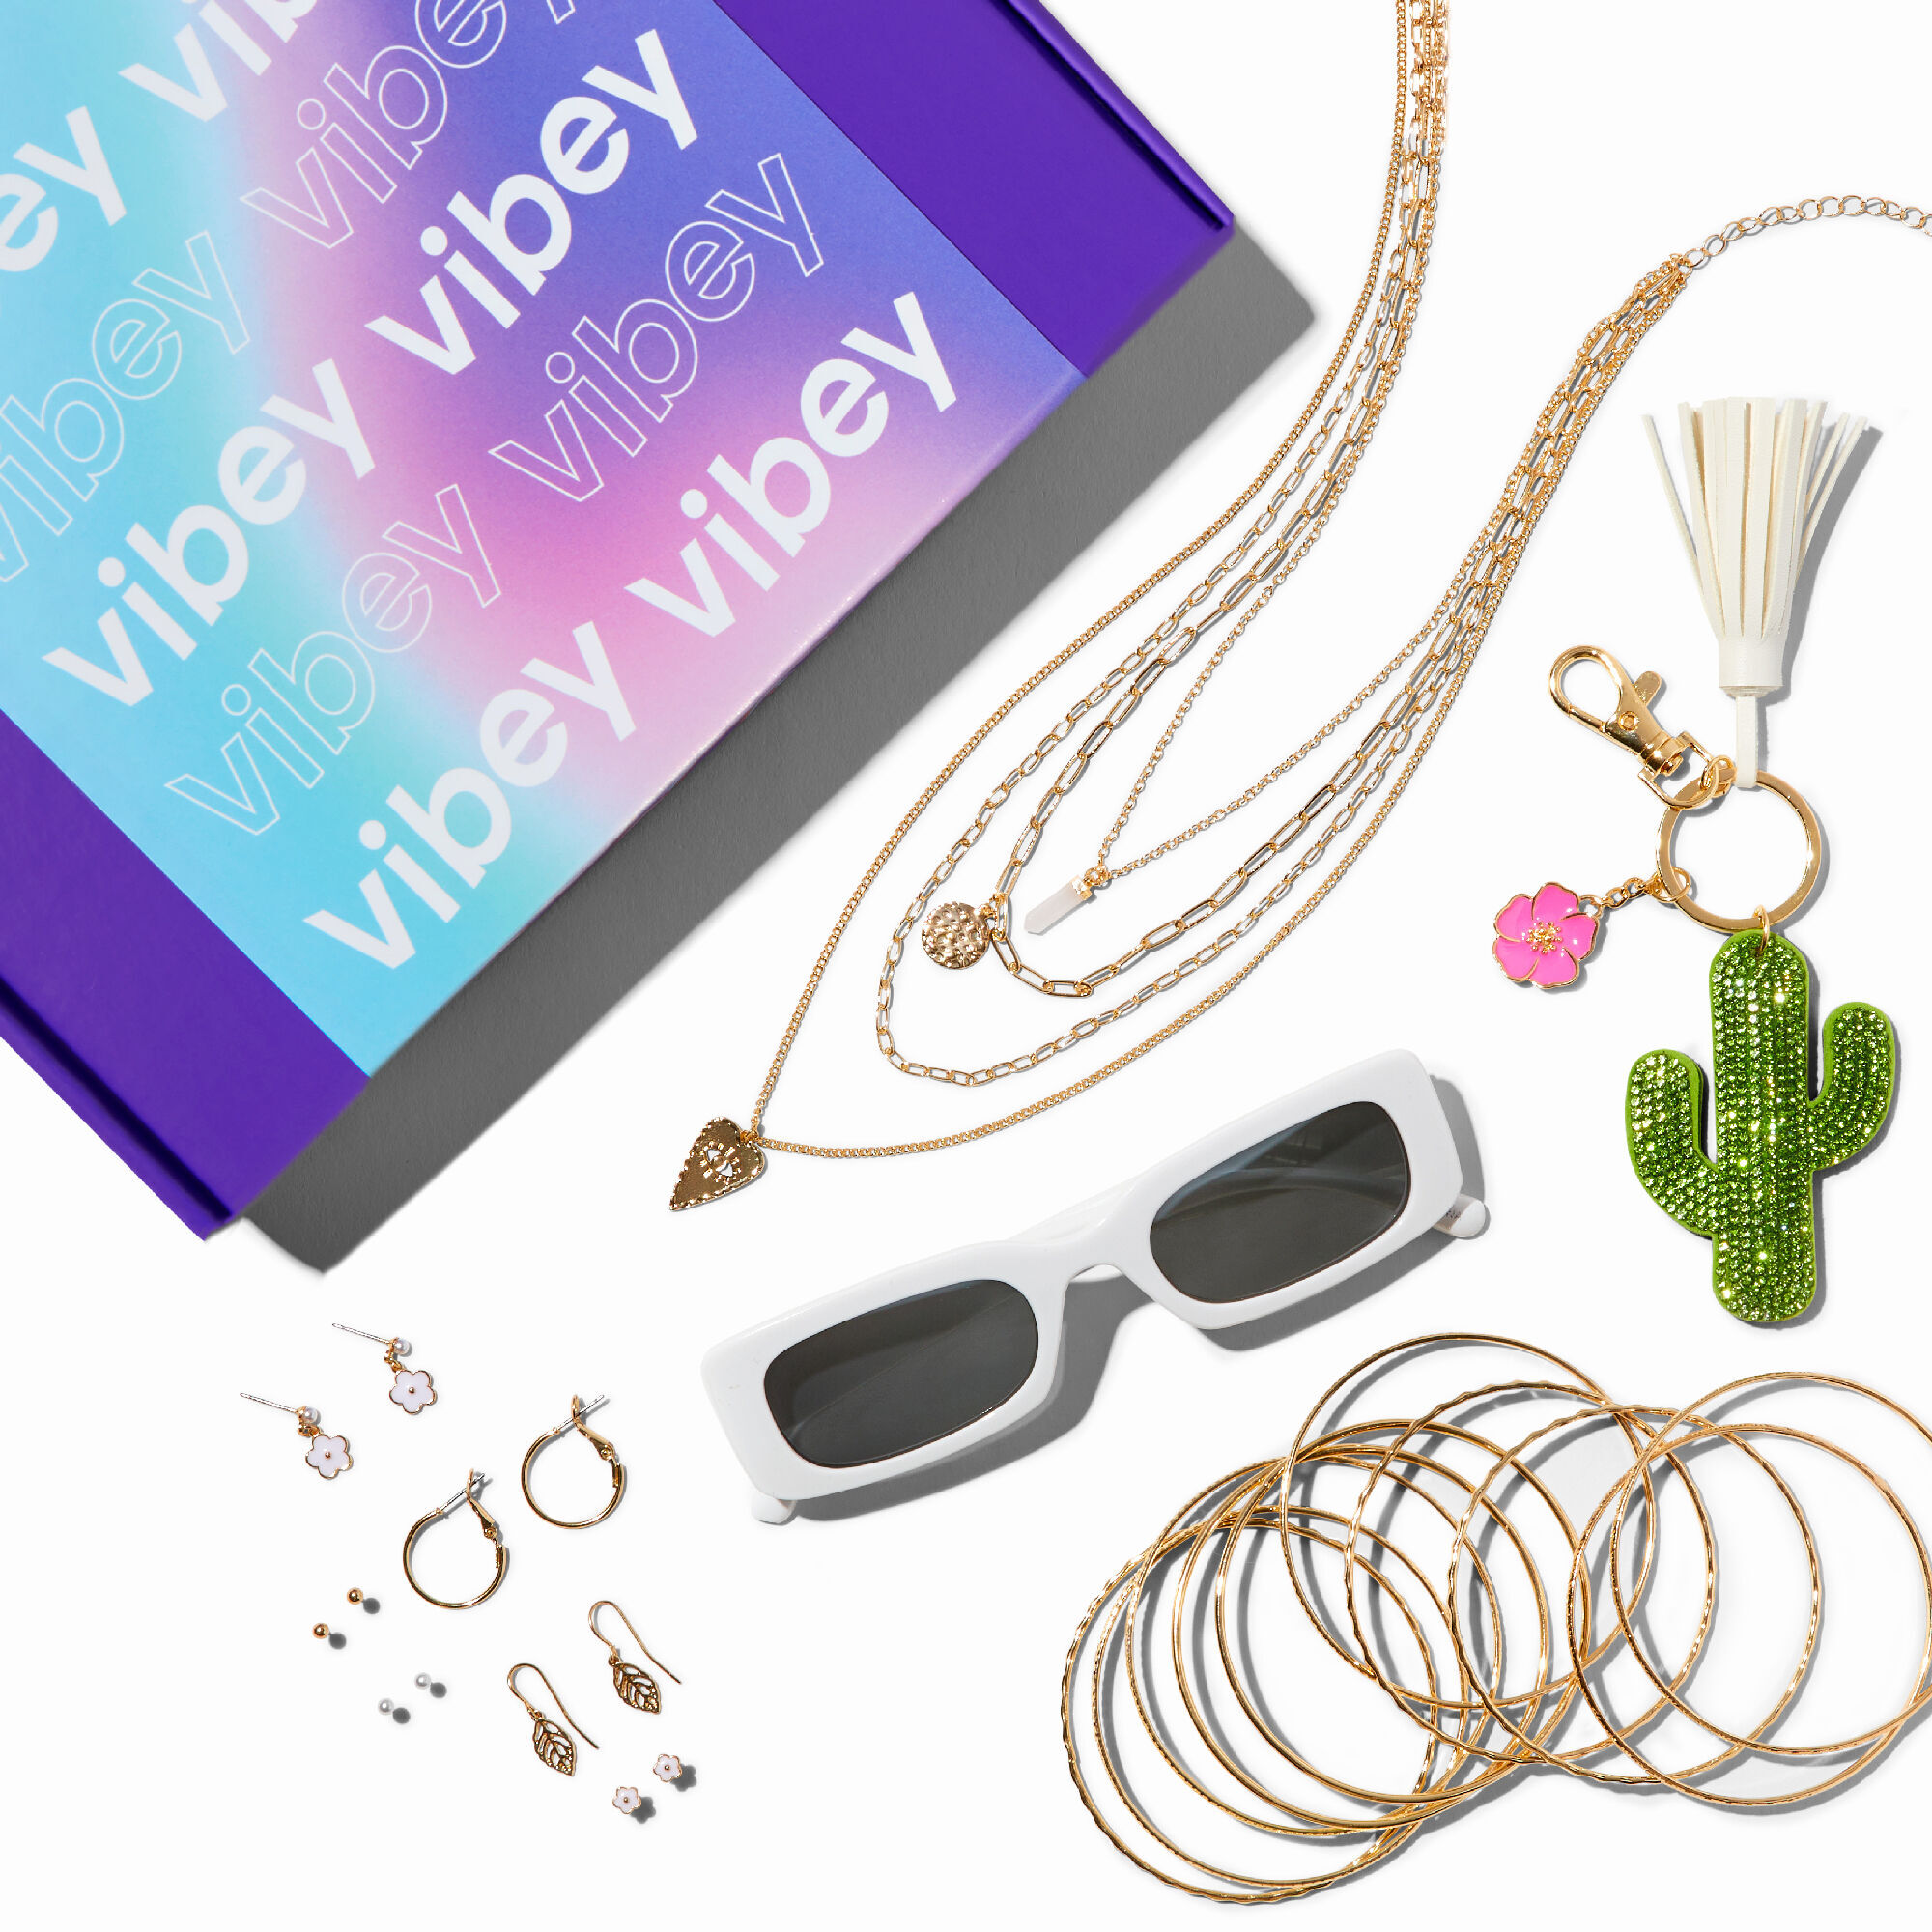 Claires Jewelry VibeyDrop: Boho In A Box, Ages 9+